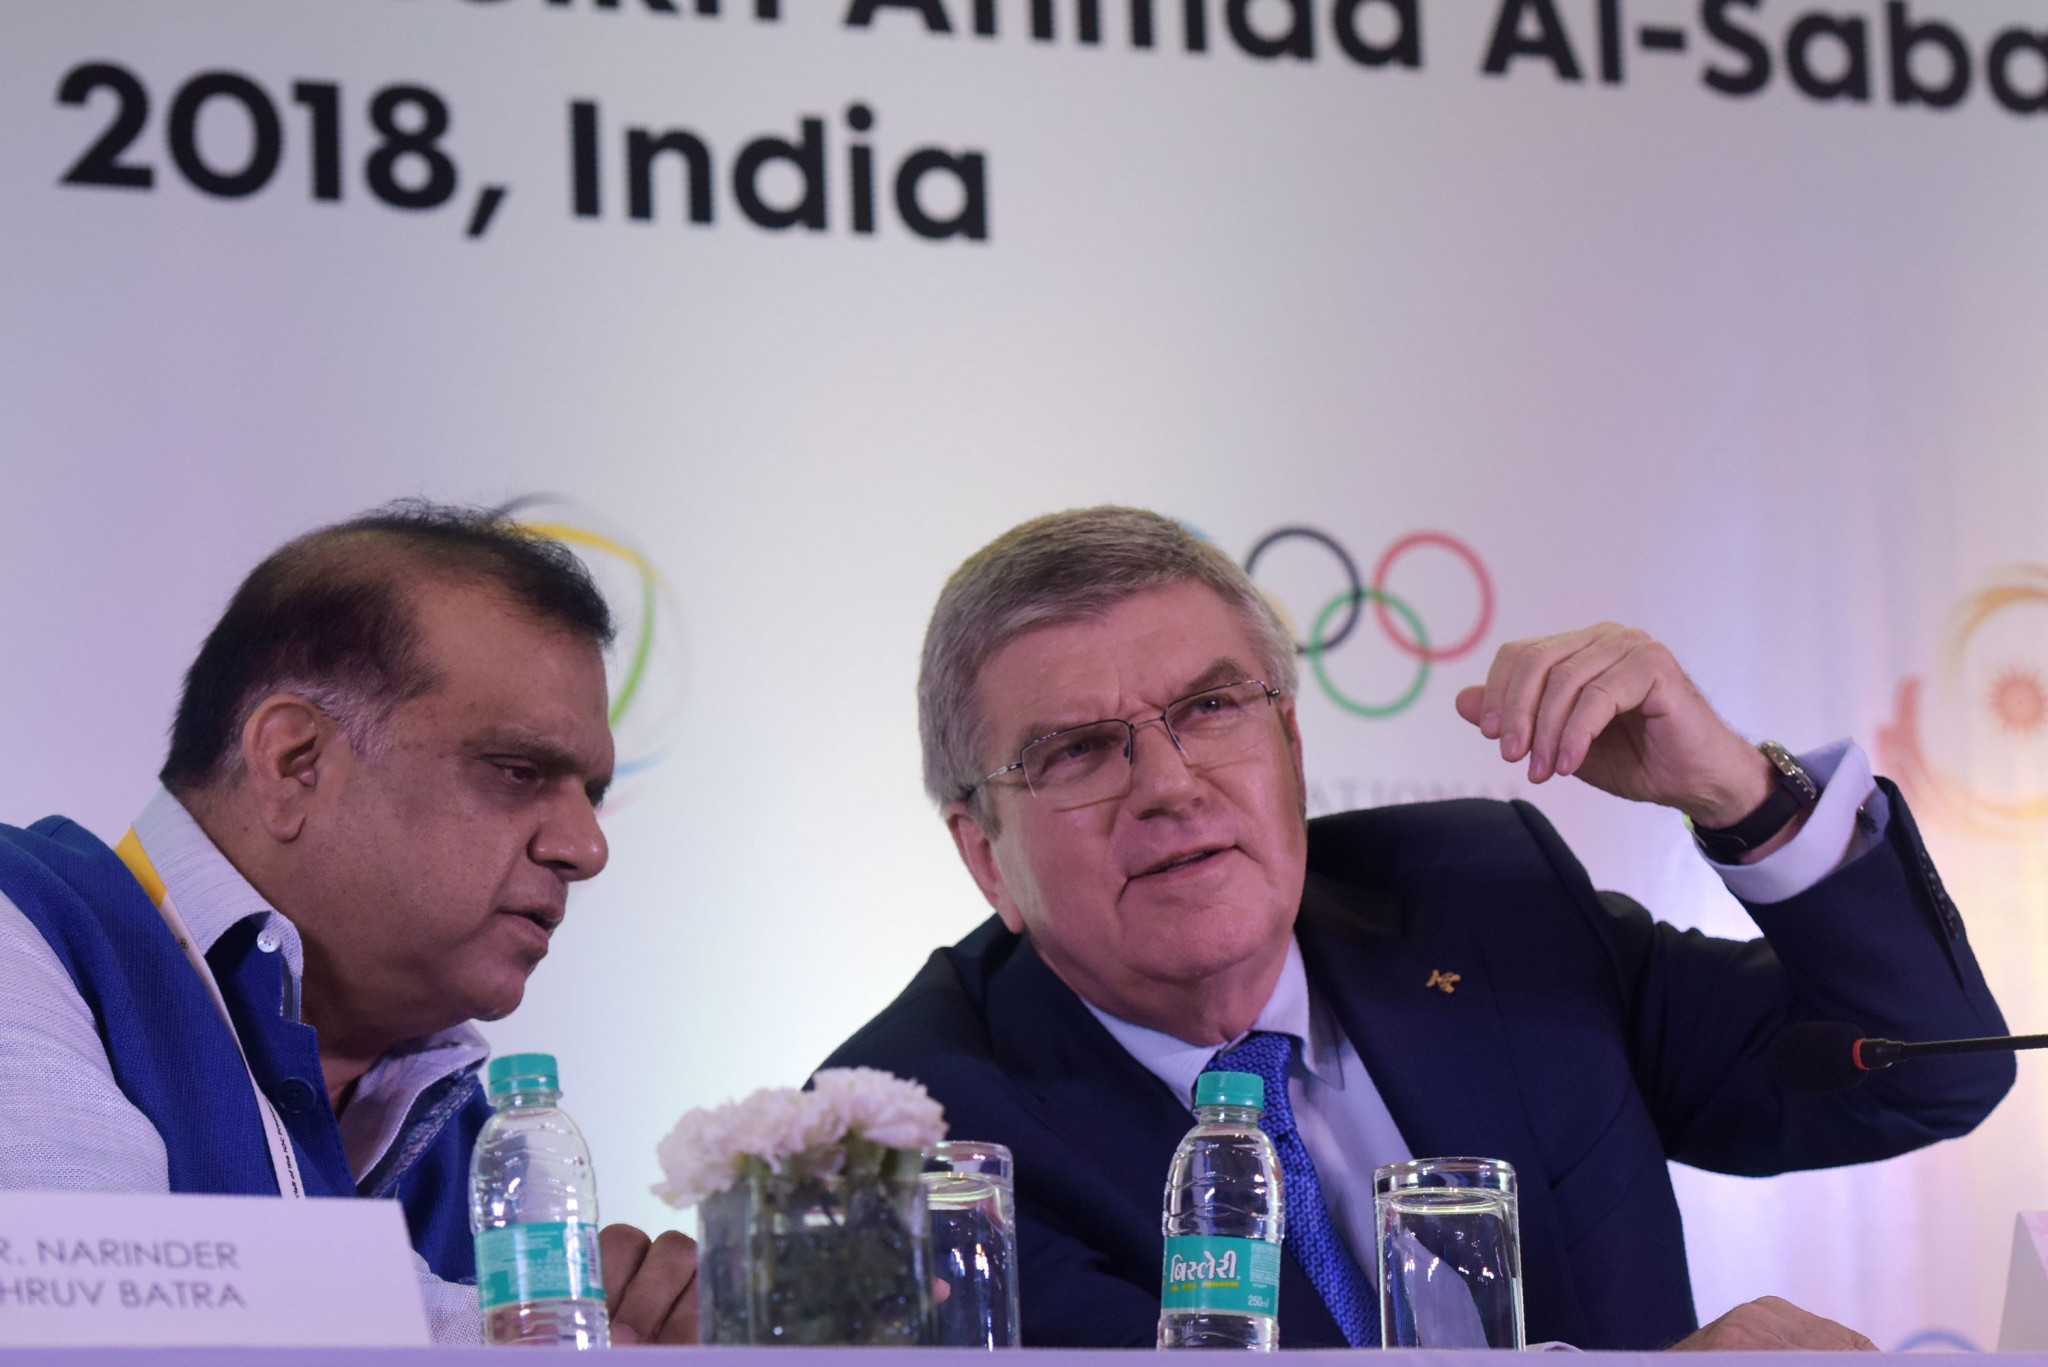 India claims it will bid for 2032 Olympic Games but Bach warns against premature discussions